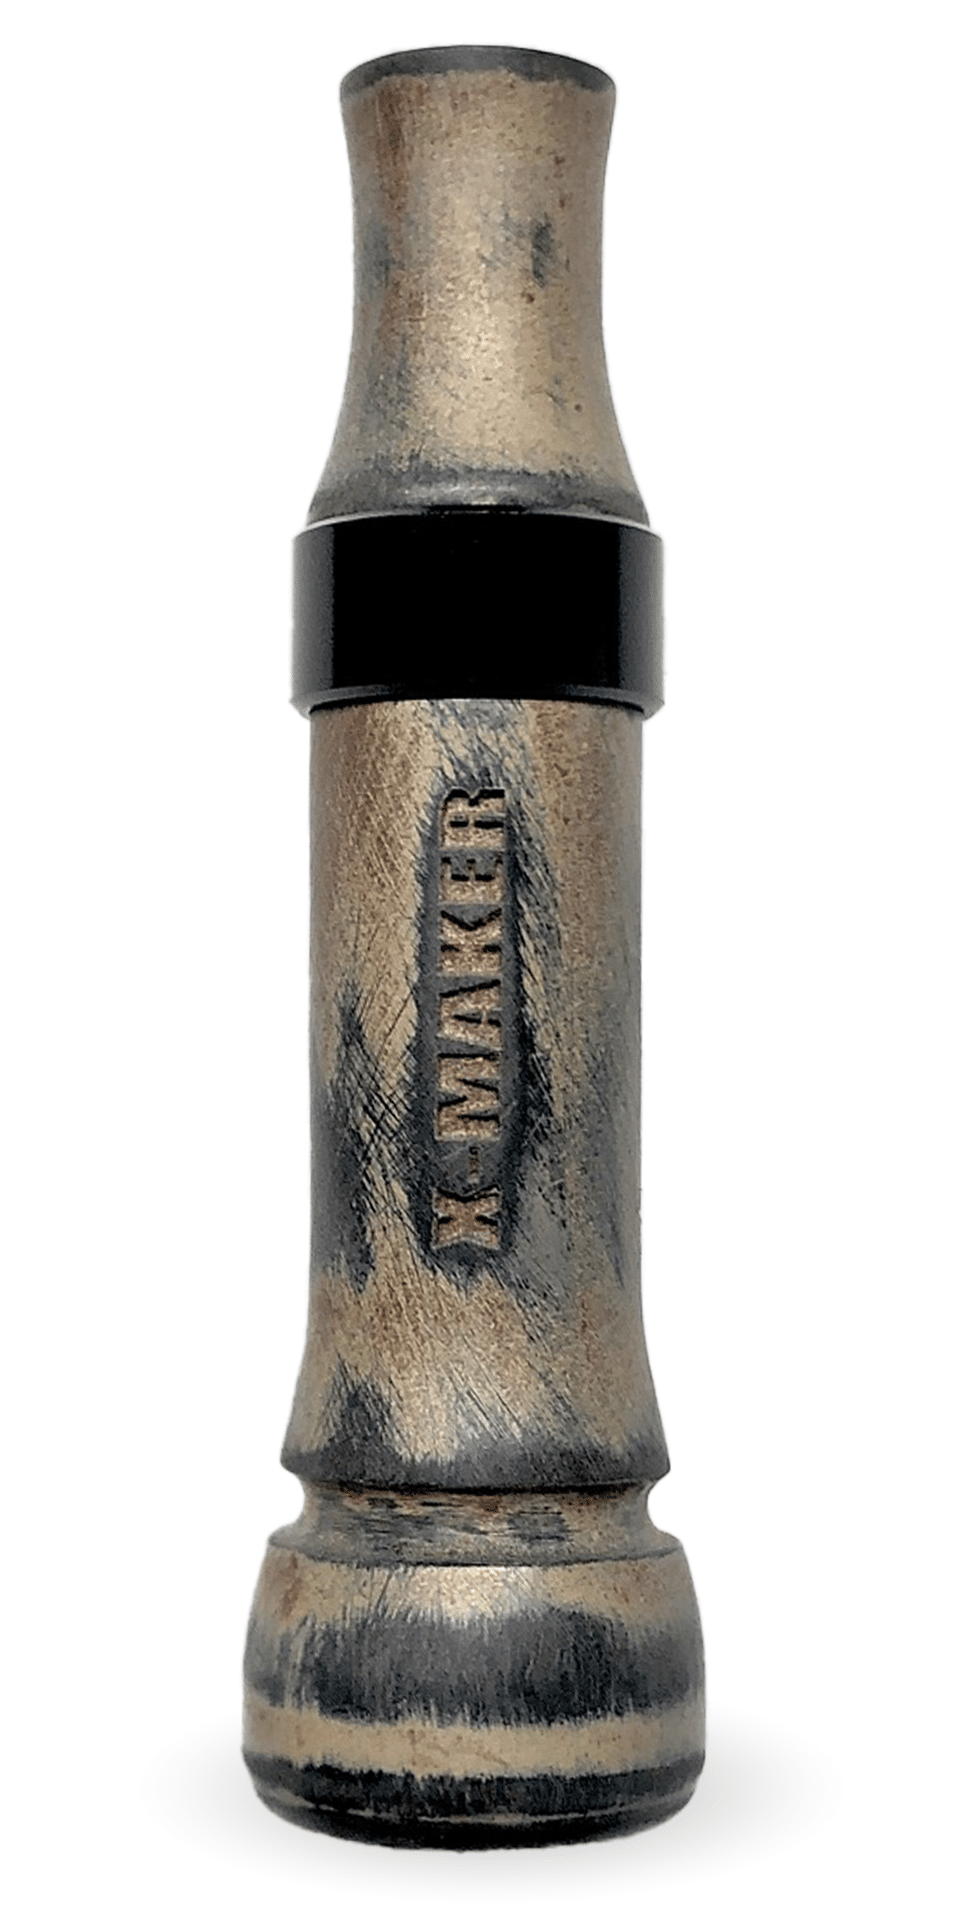 Introducing the X-MAKER Cut-Down Duck Call in Rough Finish with Etched Black Band Explore unparalleled precision and performance with the X-MAKER Cut-Down Duck Call, featuring a rugged rough finish and an elegant etched black band. Its threaded flared keyhole design ensures superior sound quality and ease of use. Key Features: Exceptional Responsiveness: Delivers outstanding high and low tones with a loud, smooth sound that captures every duck's attention. User-Friendly Design: Ideal for both novice and seasoned hunters, this call offers easy operation and exceptional effectiveness in the field. American-Made Excellence: Proudly cast and crafted in the USA from durable hard cast acrylic, ensuring enduring performance. Masterful Craftsmanship: Precision built, designed, cut, and hand-tuned by the legendary Kirk McCullough, ensuring top-tier quality. Enhance your hunting experience with the precision, reliability, and expert craftsmanship of the X-MAKER Cut-Down Duck Call. Elevate every hunt with this exceptional American-made call, crafted on the great Mississippi flyway in Arkansas.